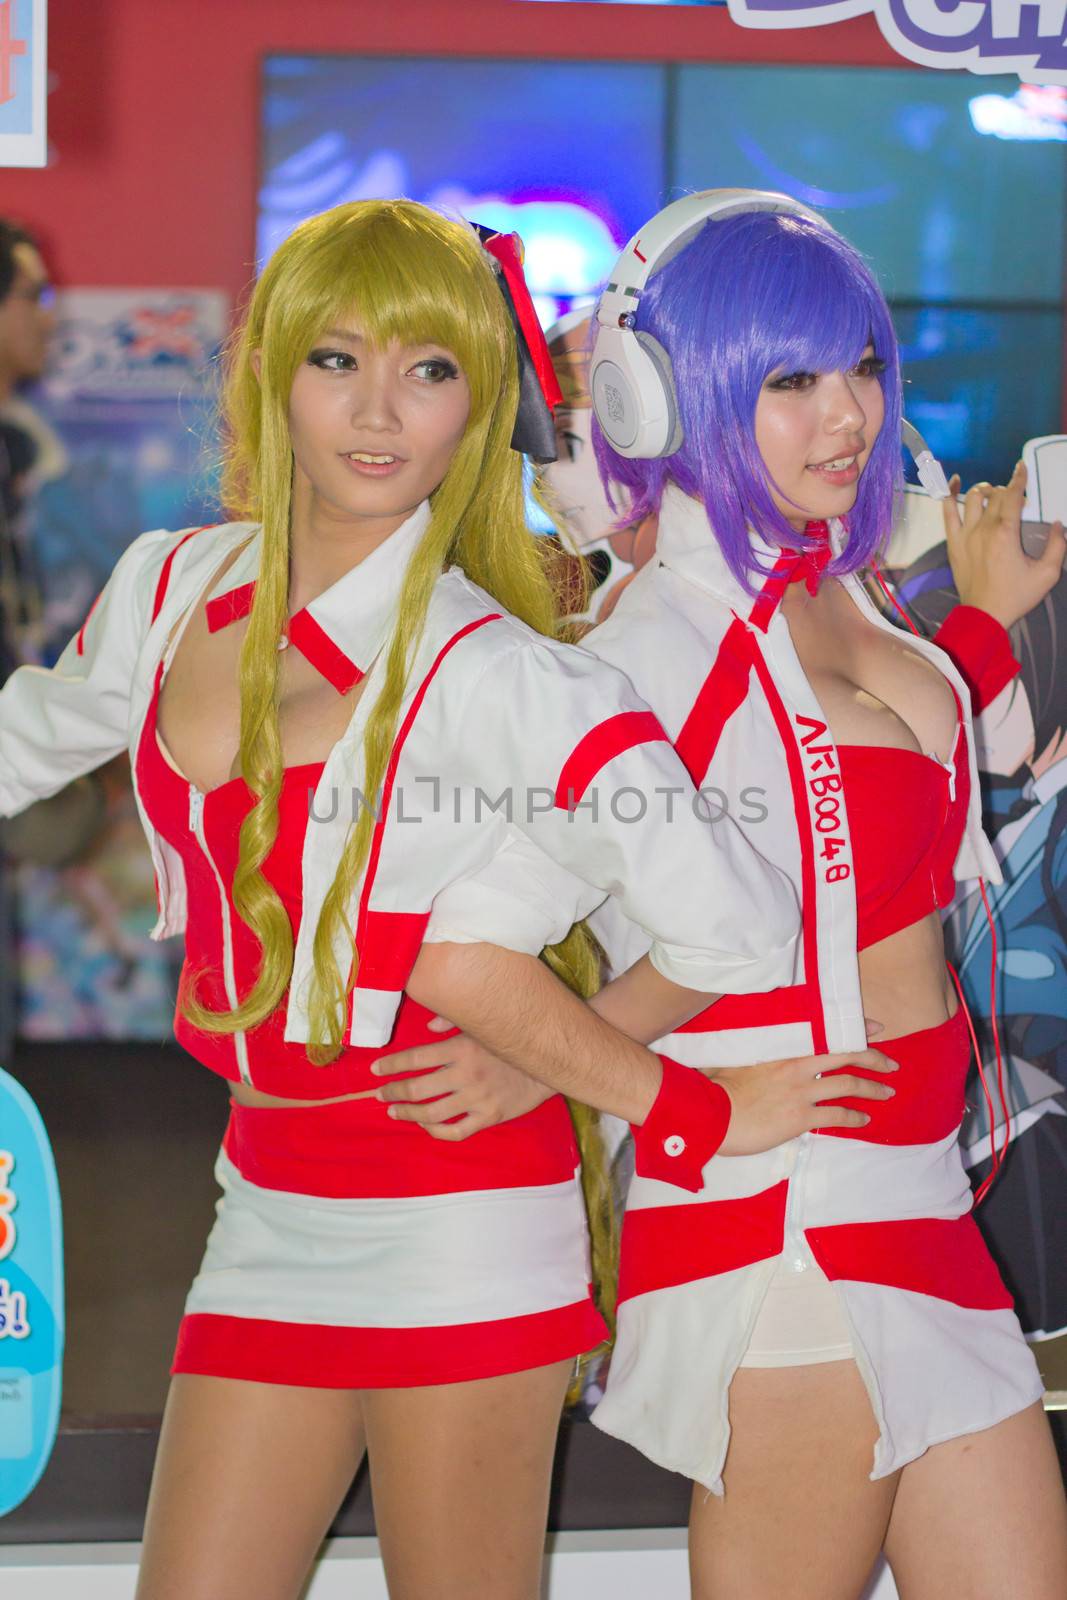 An unidentified Japanese anime cosplay pose in Thailand Game Show BIG Festival 2013 by redthirteen